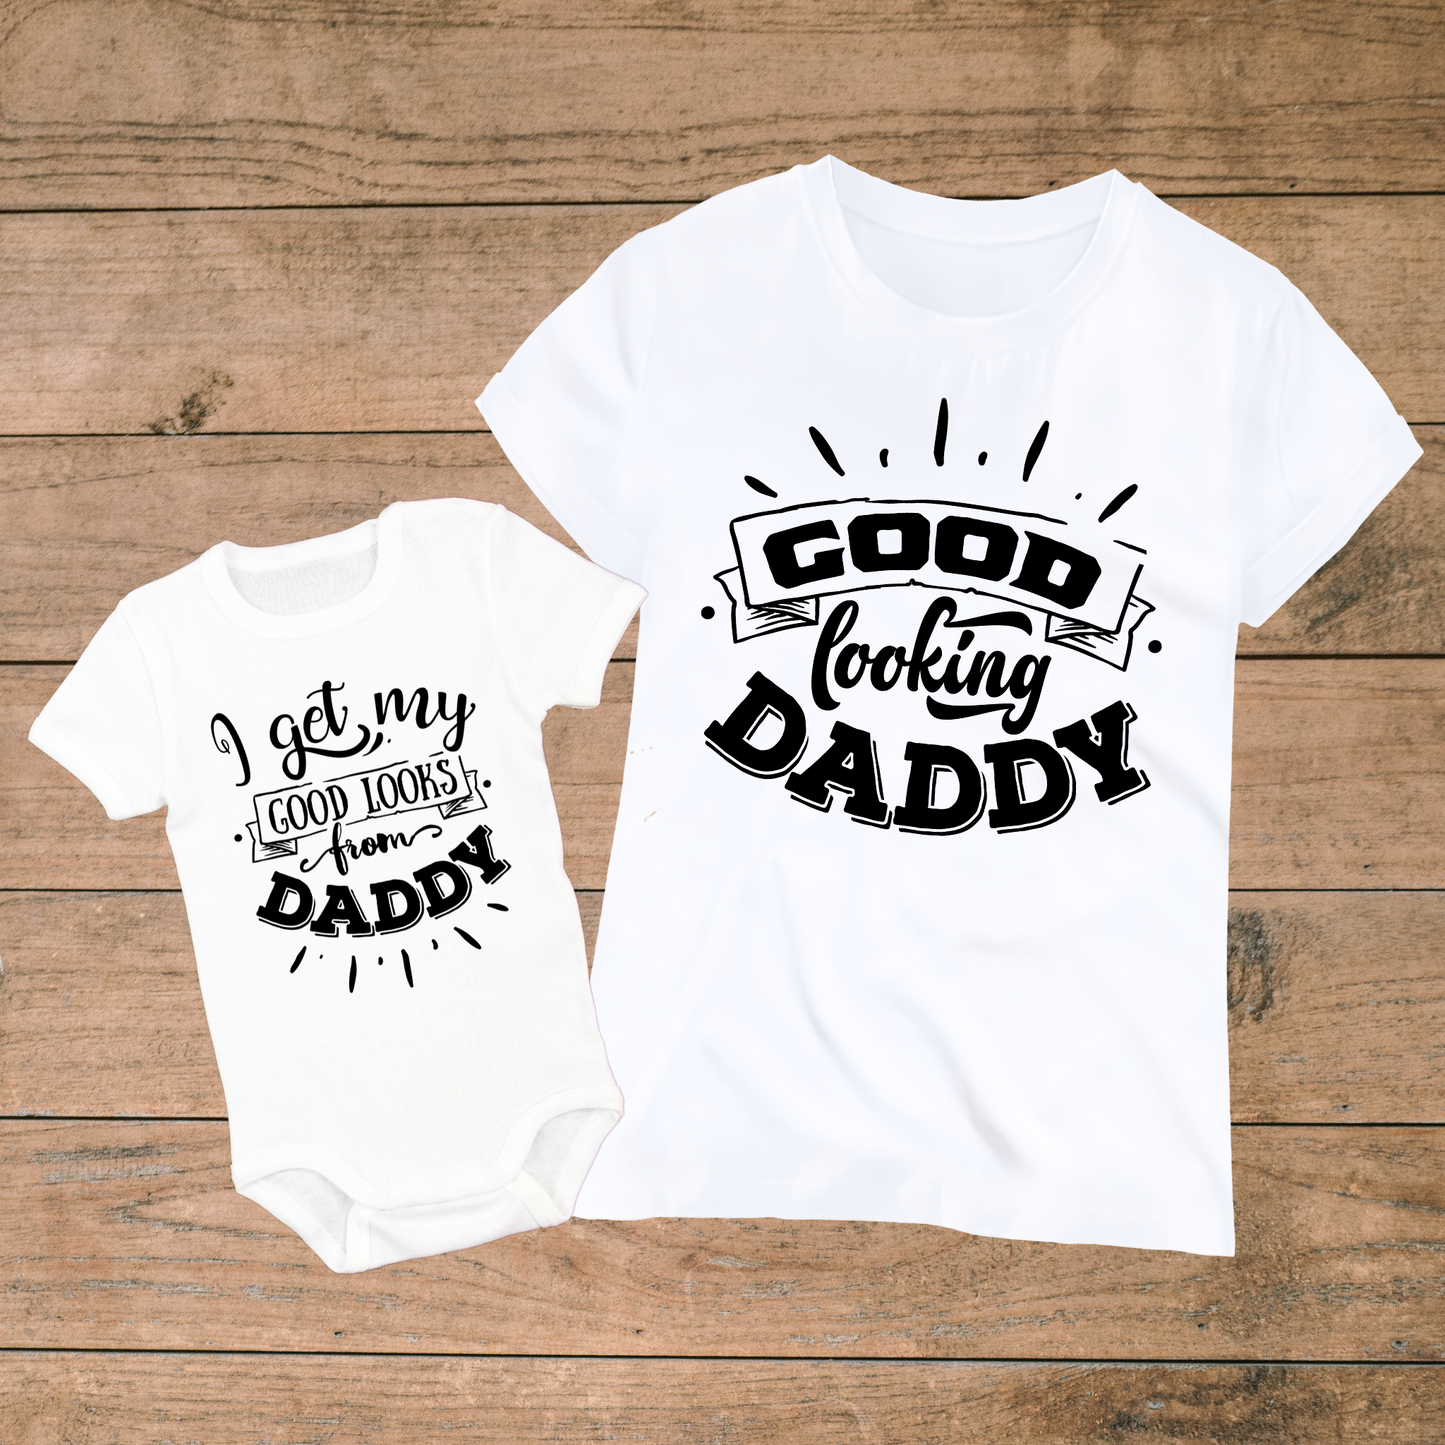 Daddy & Me Matching "Good Looks" Outfits